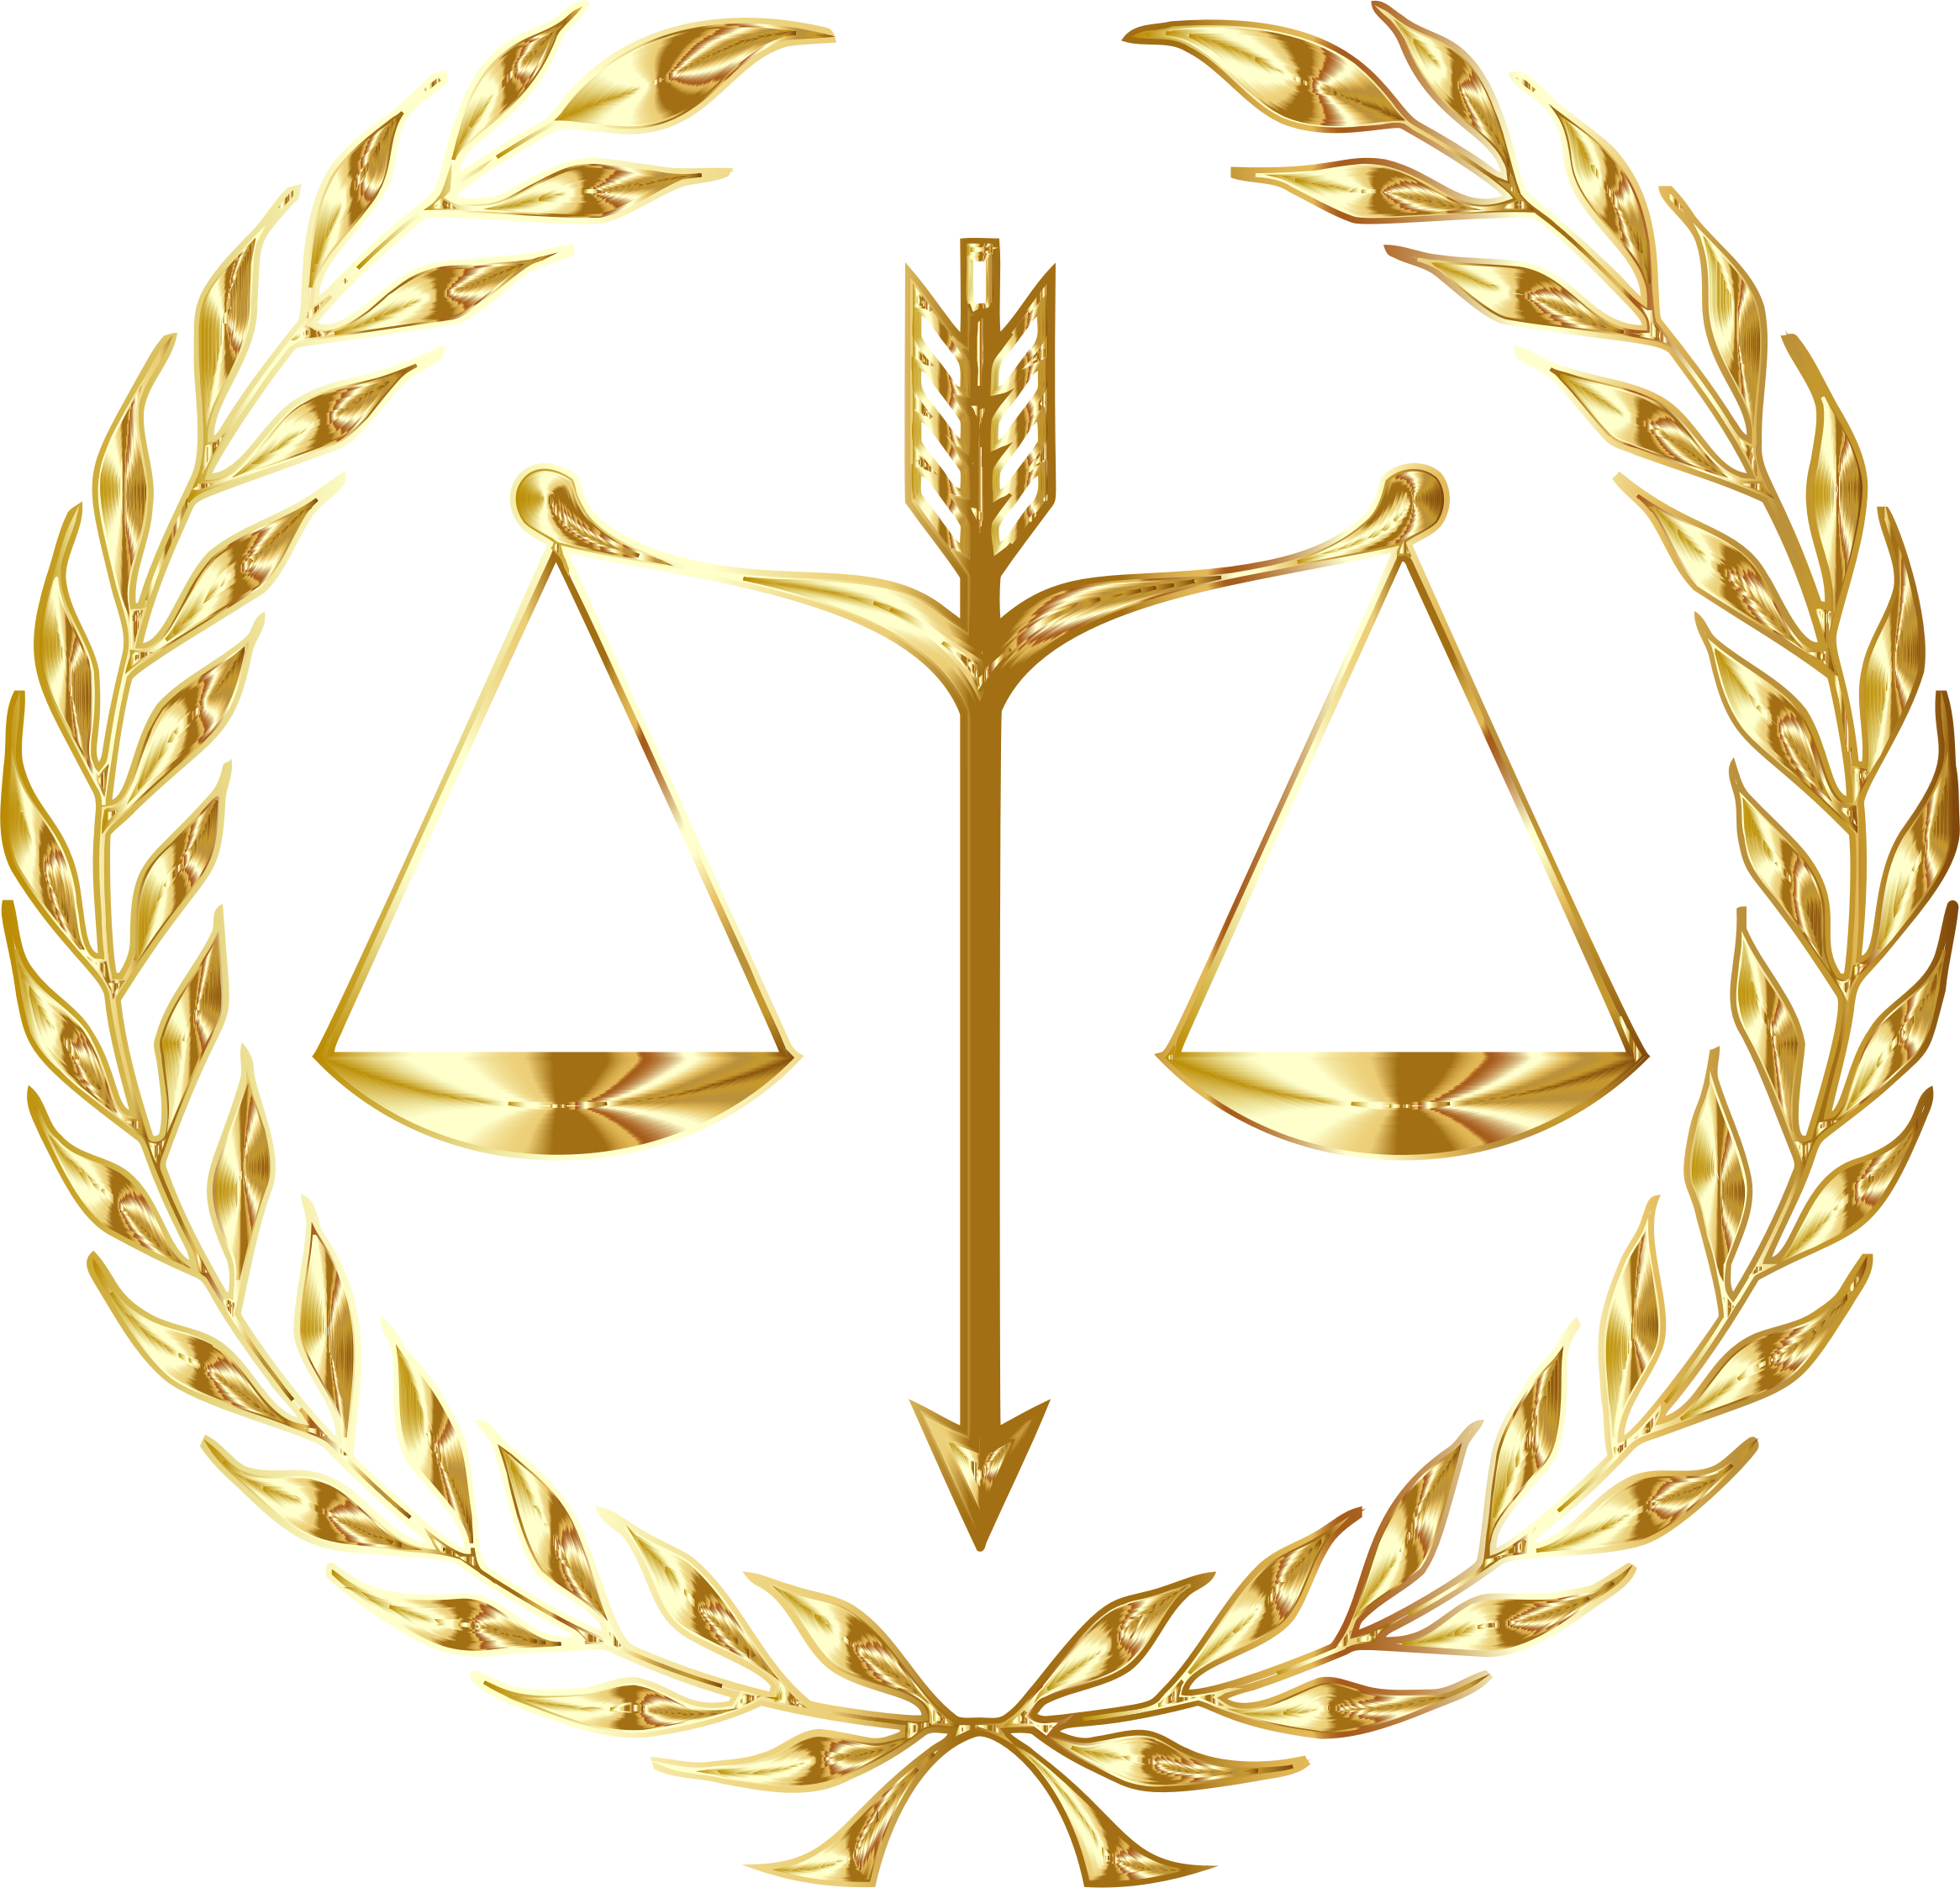 A Gold Laurel Wreath With Scales Of Justice